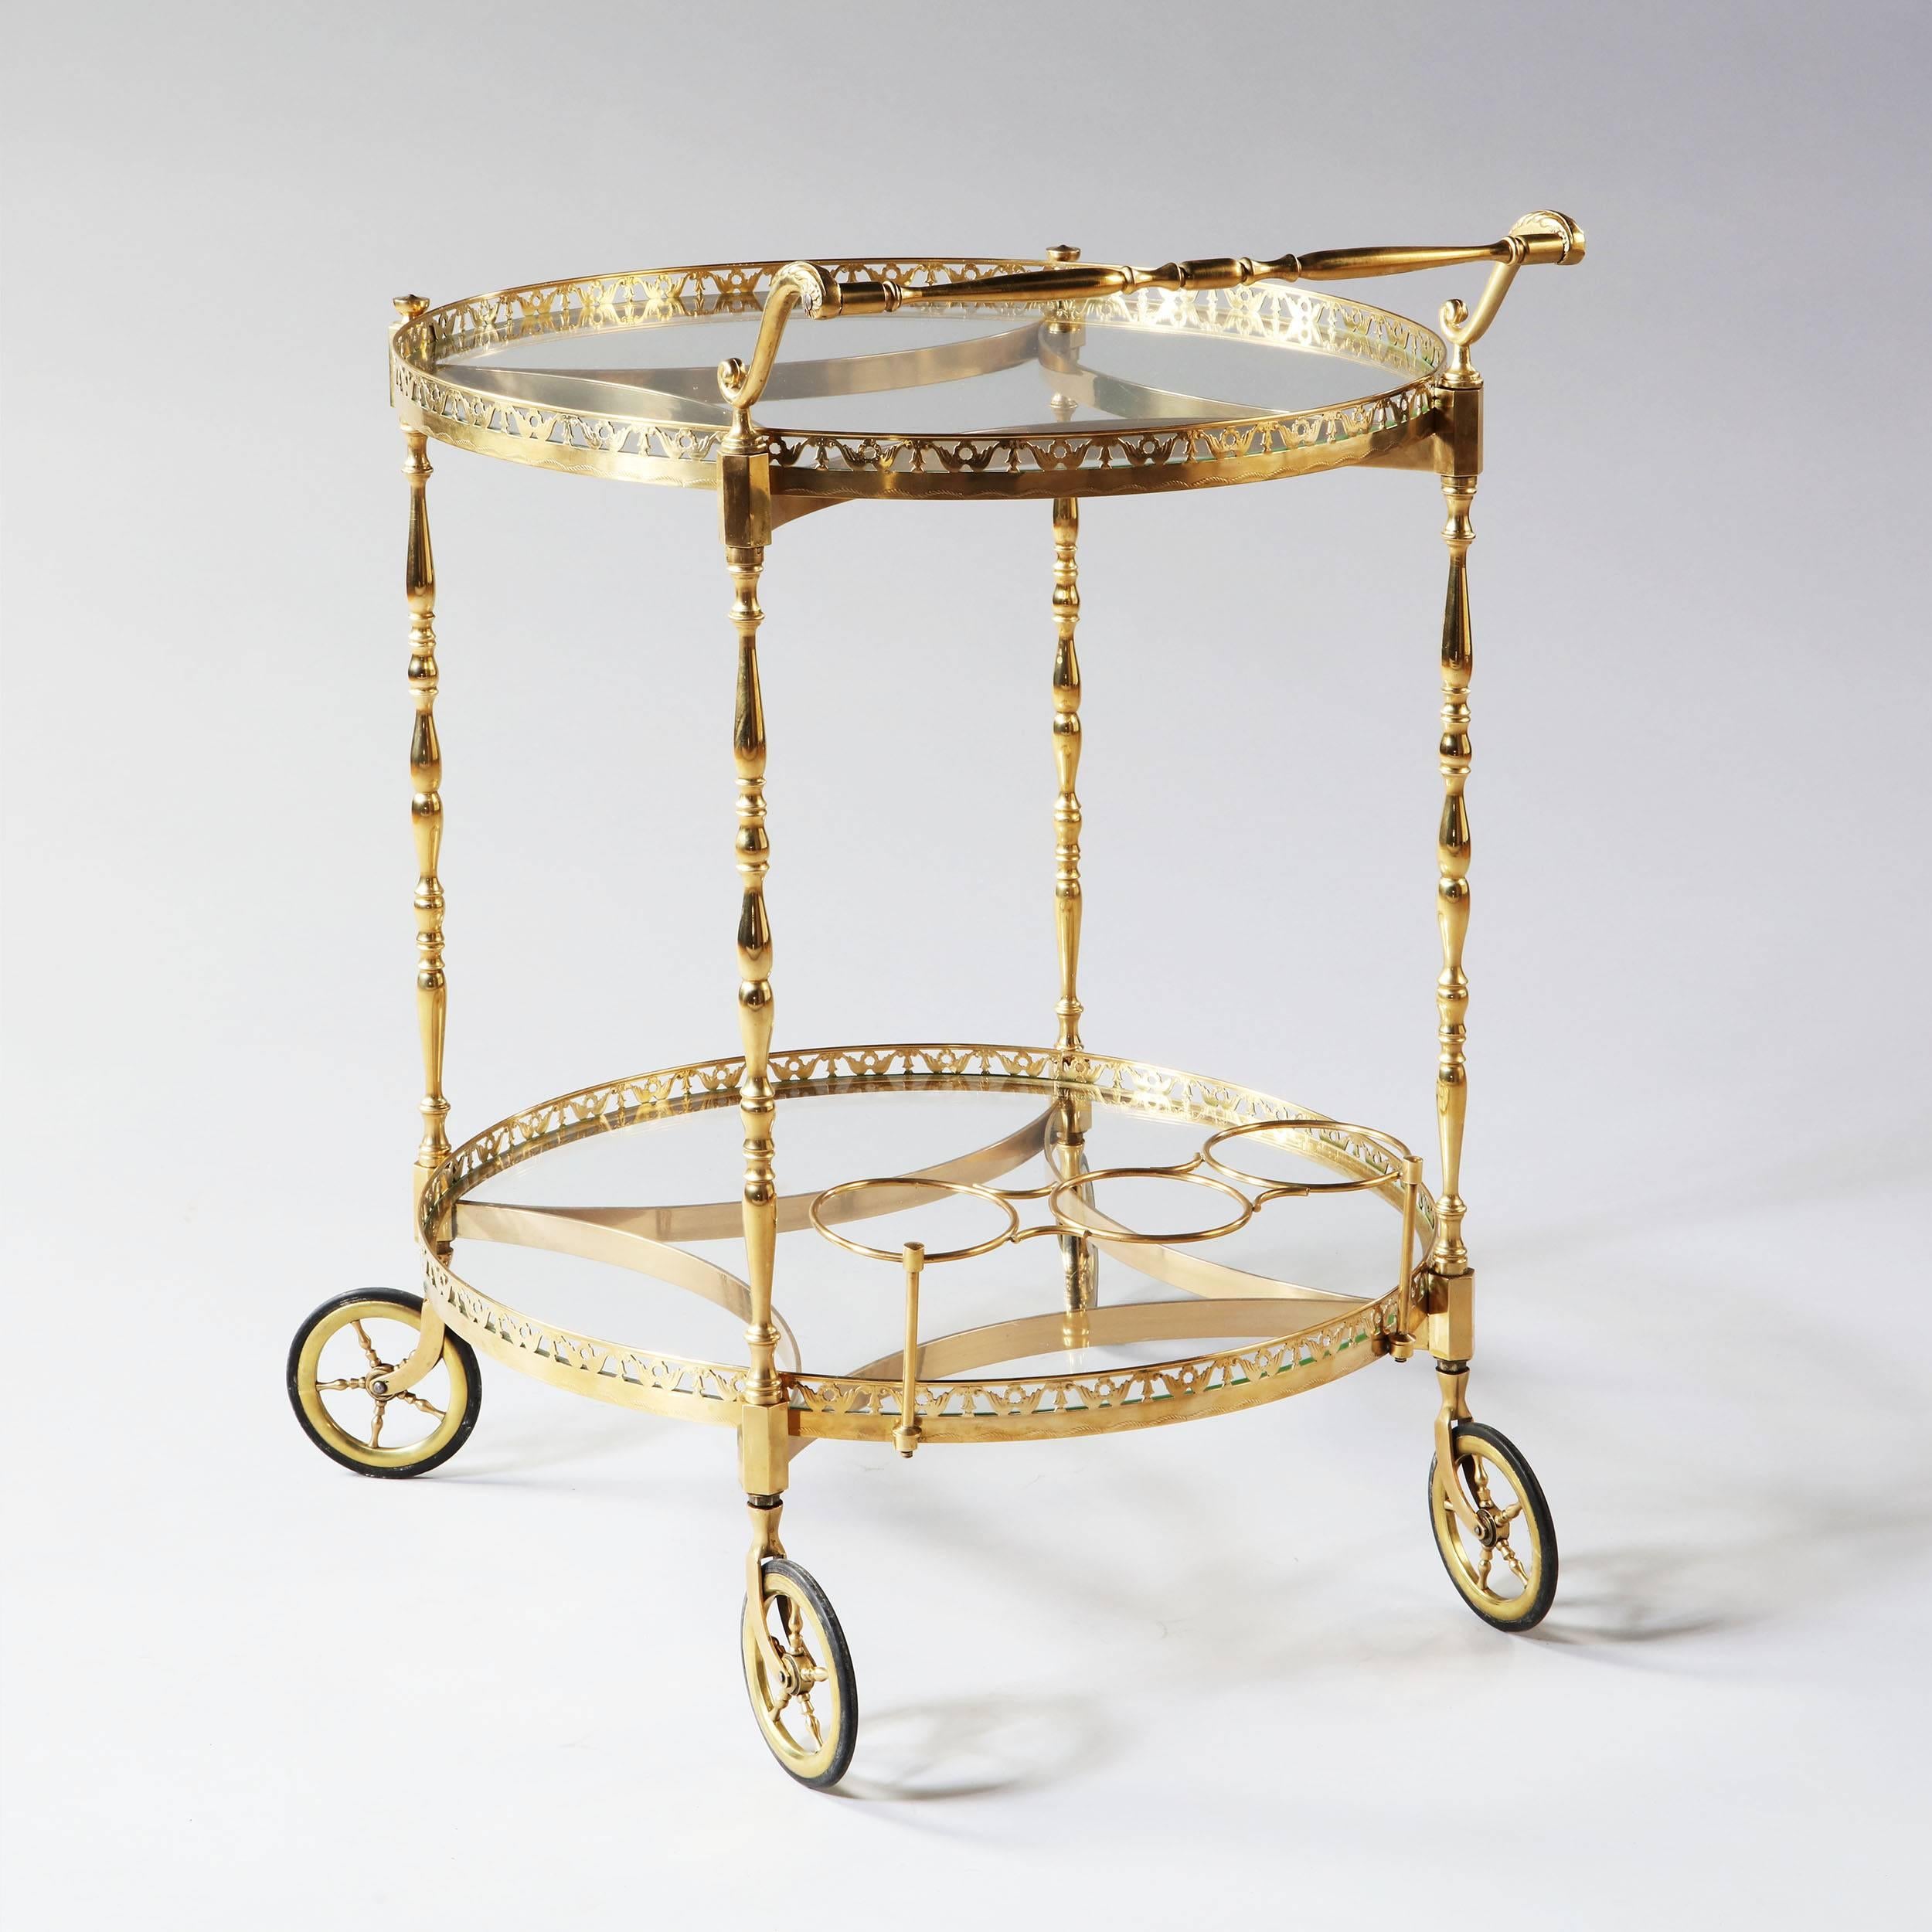 Fabulous and very fine circular polished brass bar cart with two levels, the borders of pierced brass supported on turned brass legs with concave stretchers, an ornate handle and raised on four brass wheels. 

Attributed to Maison